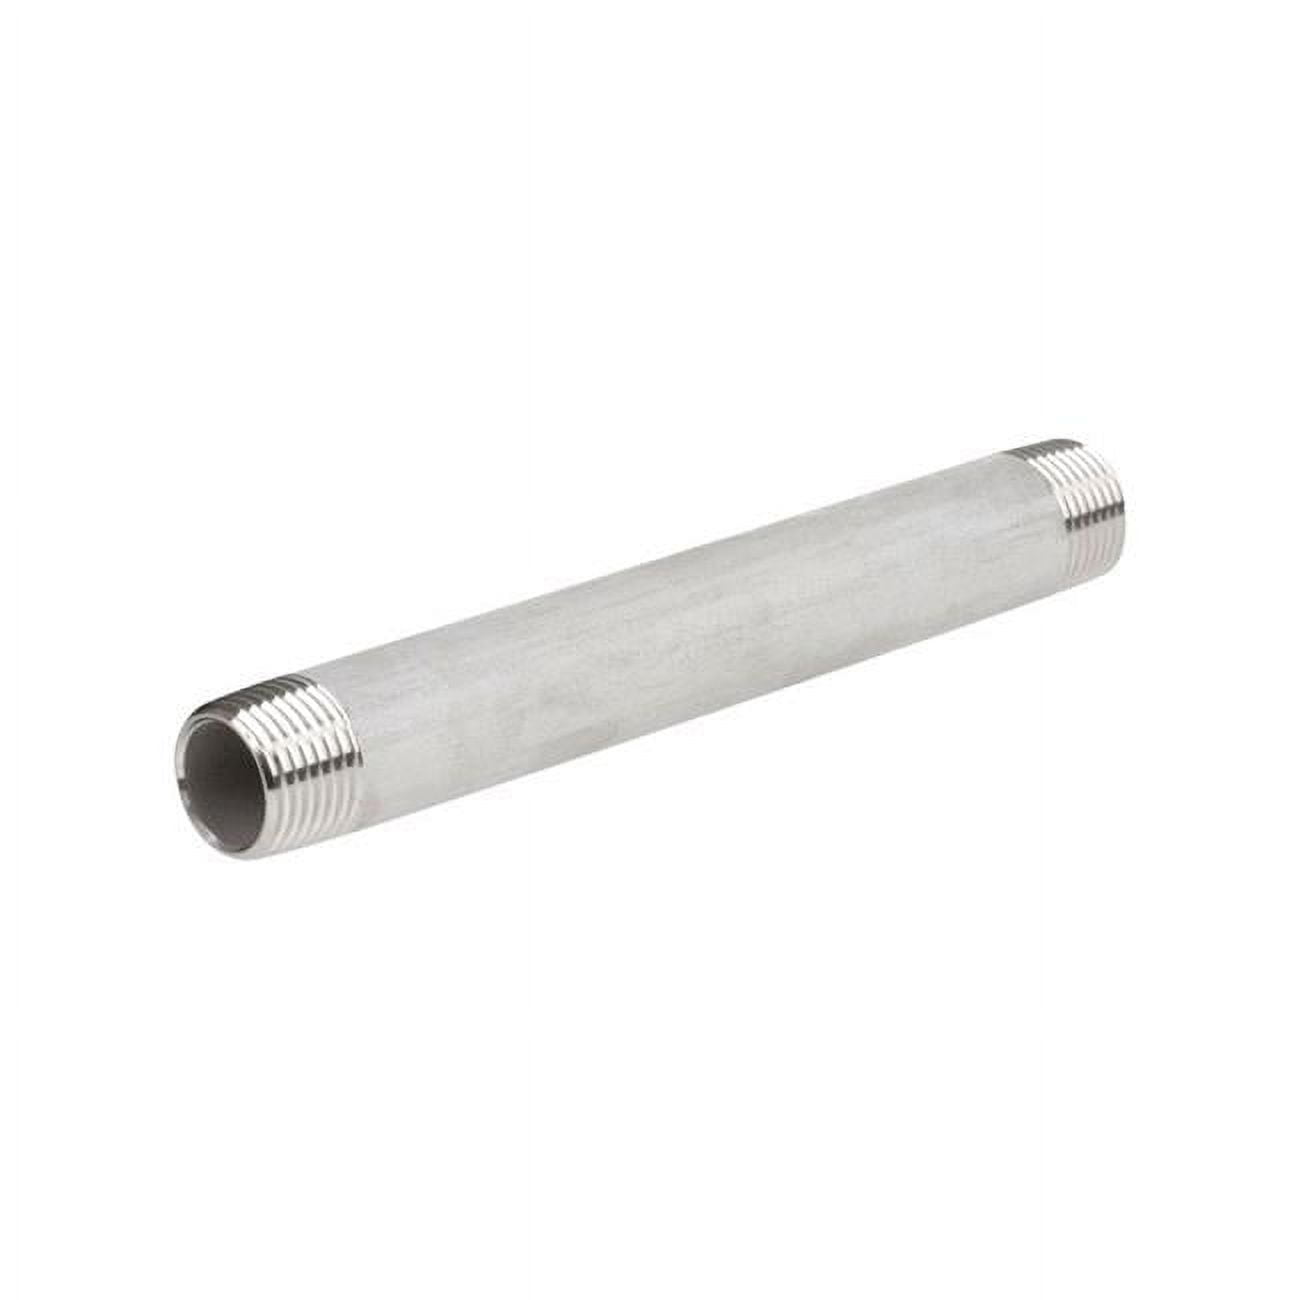 4809968 Stainless Steel Pipe Nipple - 1 In. X 1 Dia. X 4 In.